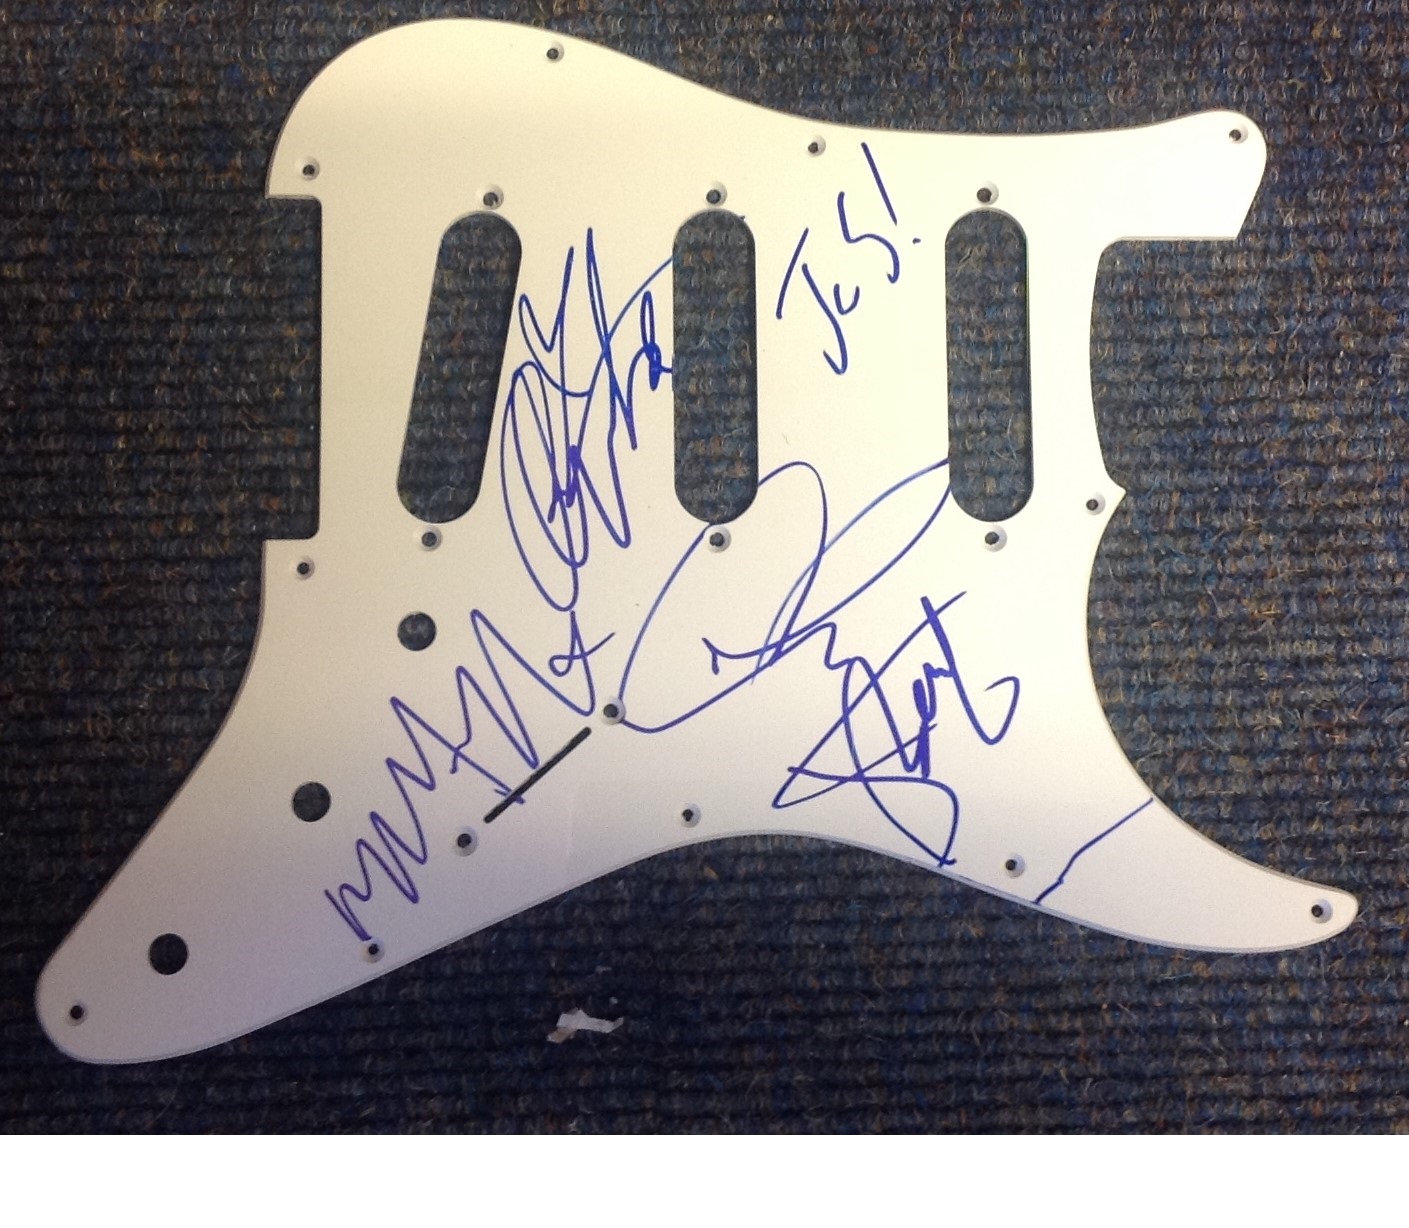 JLS guitar plate signed by band members Aston Merrygold, Oritse Williams, Marvin Humes, and JB Gill.